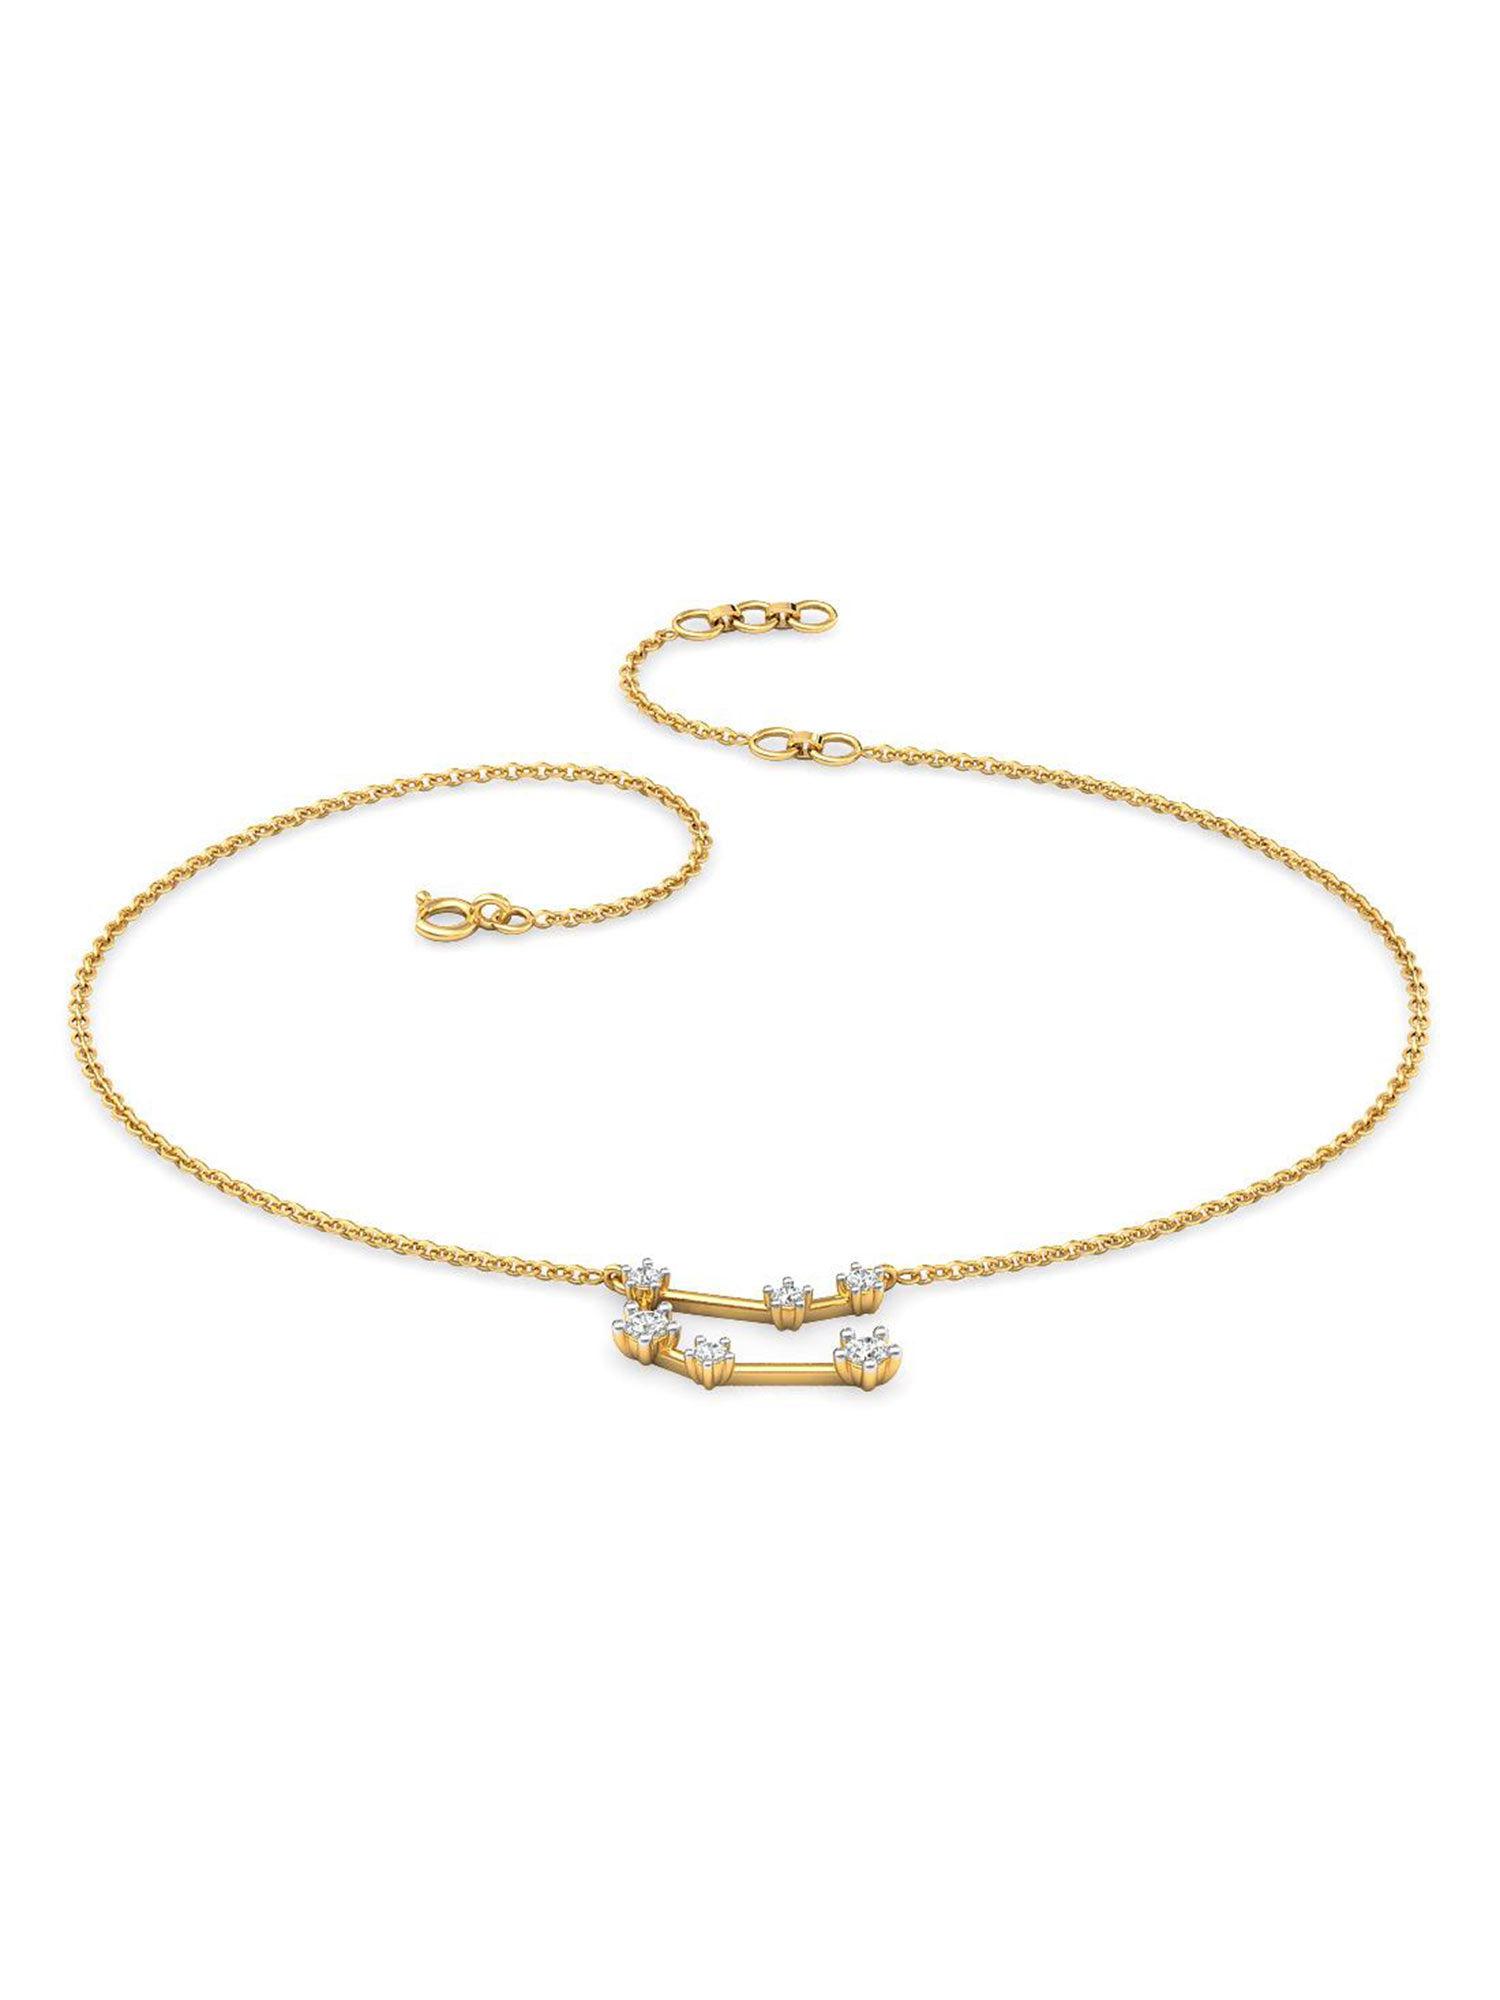 gemini 14k yellow gold and diamond anklet for women